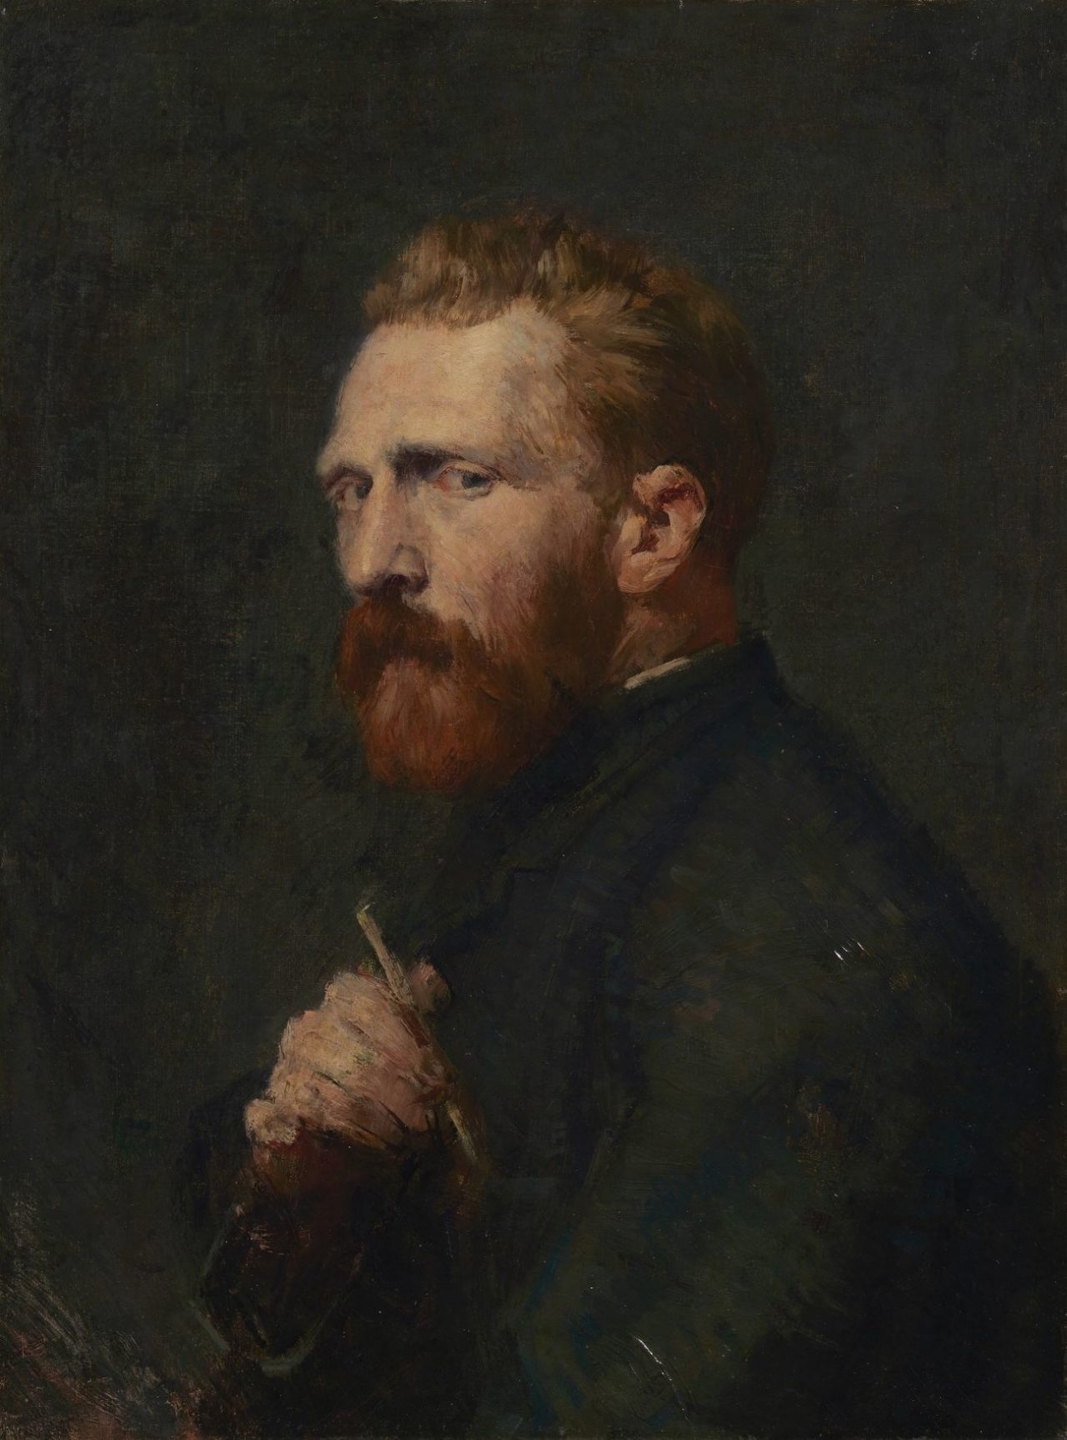 Who painted the first oil portrait of Vincent van Gogh?